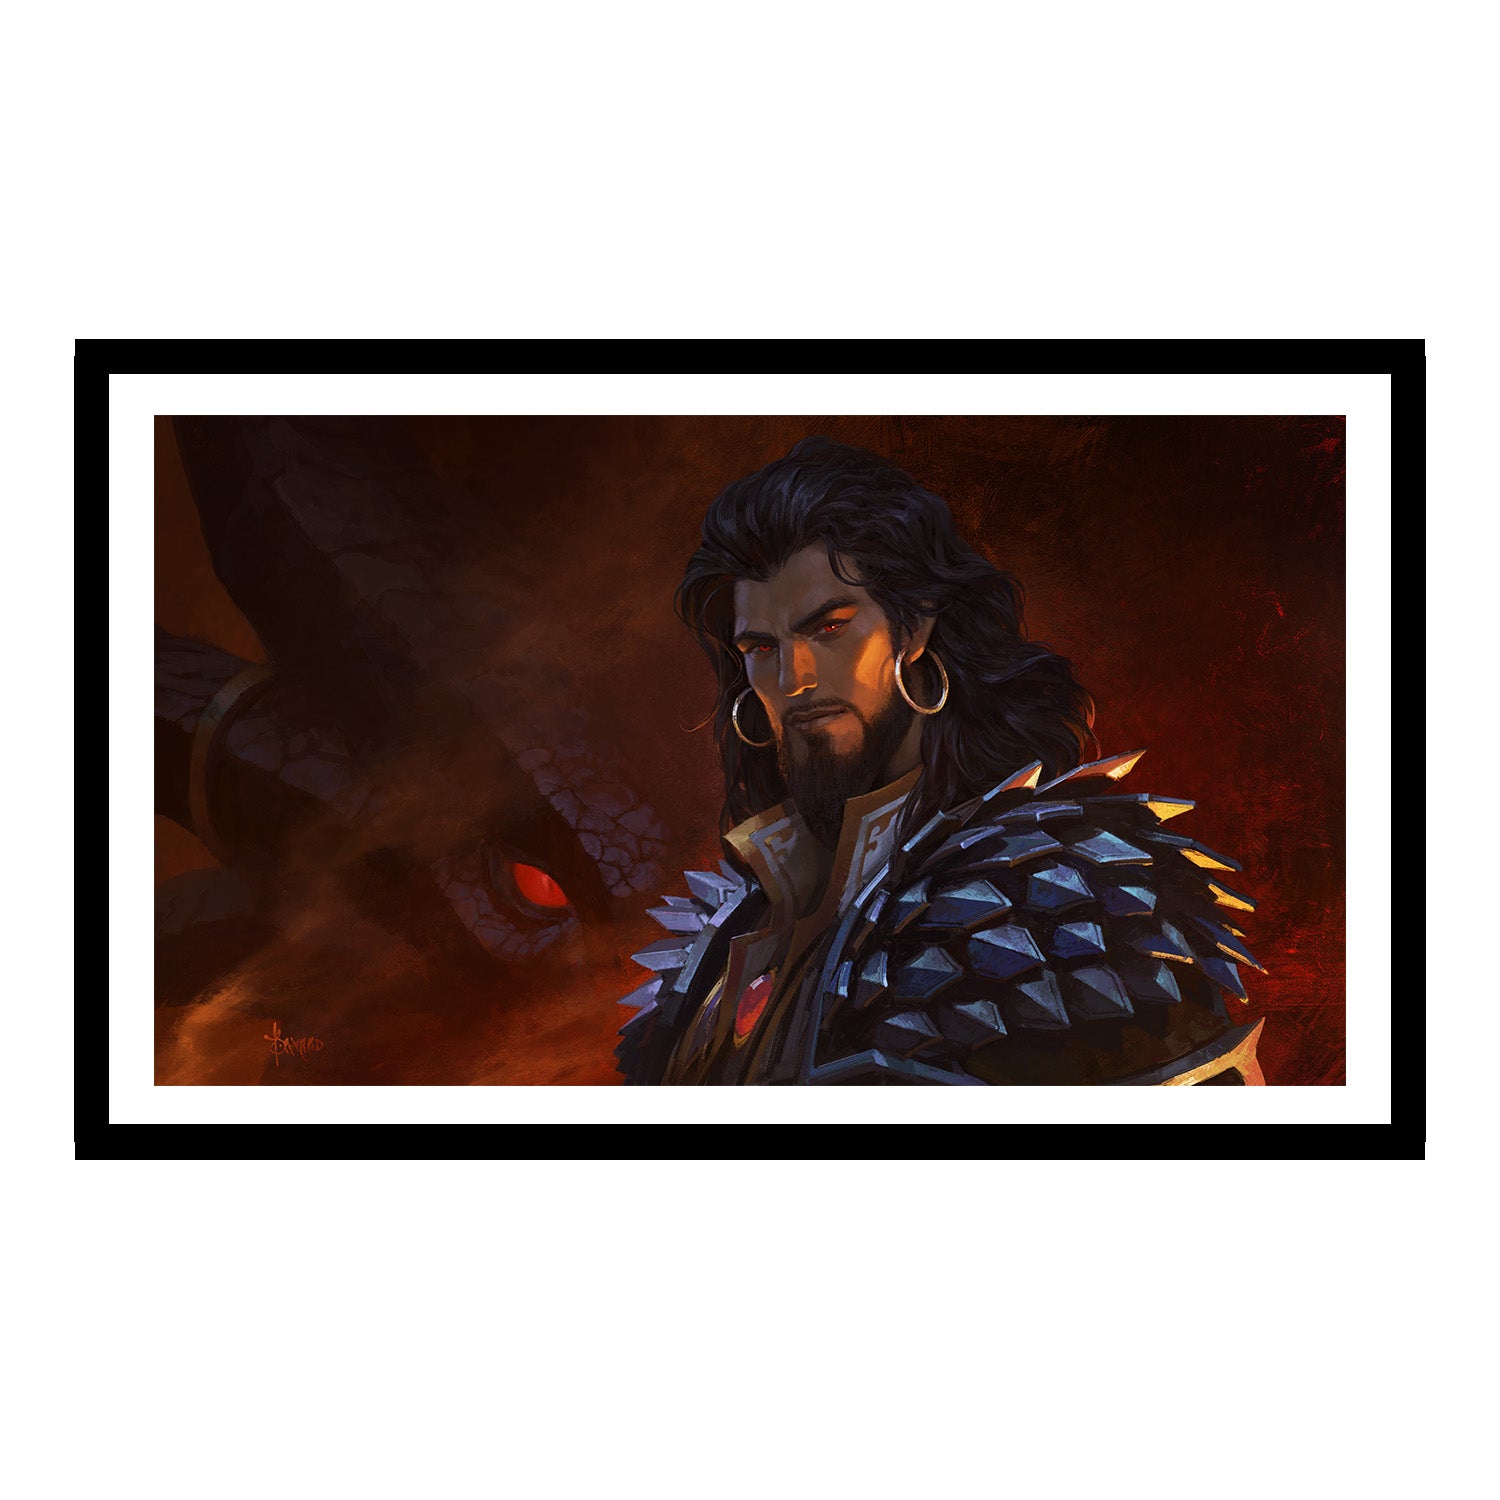 World of Warcraft Wrathion 30.5 x 43.4 cm Framed Art Print - Front View